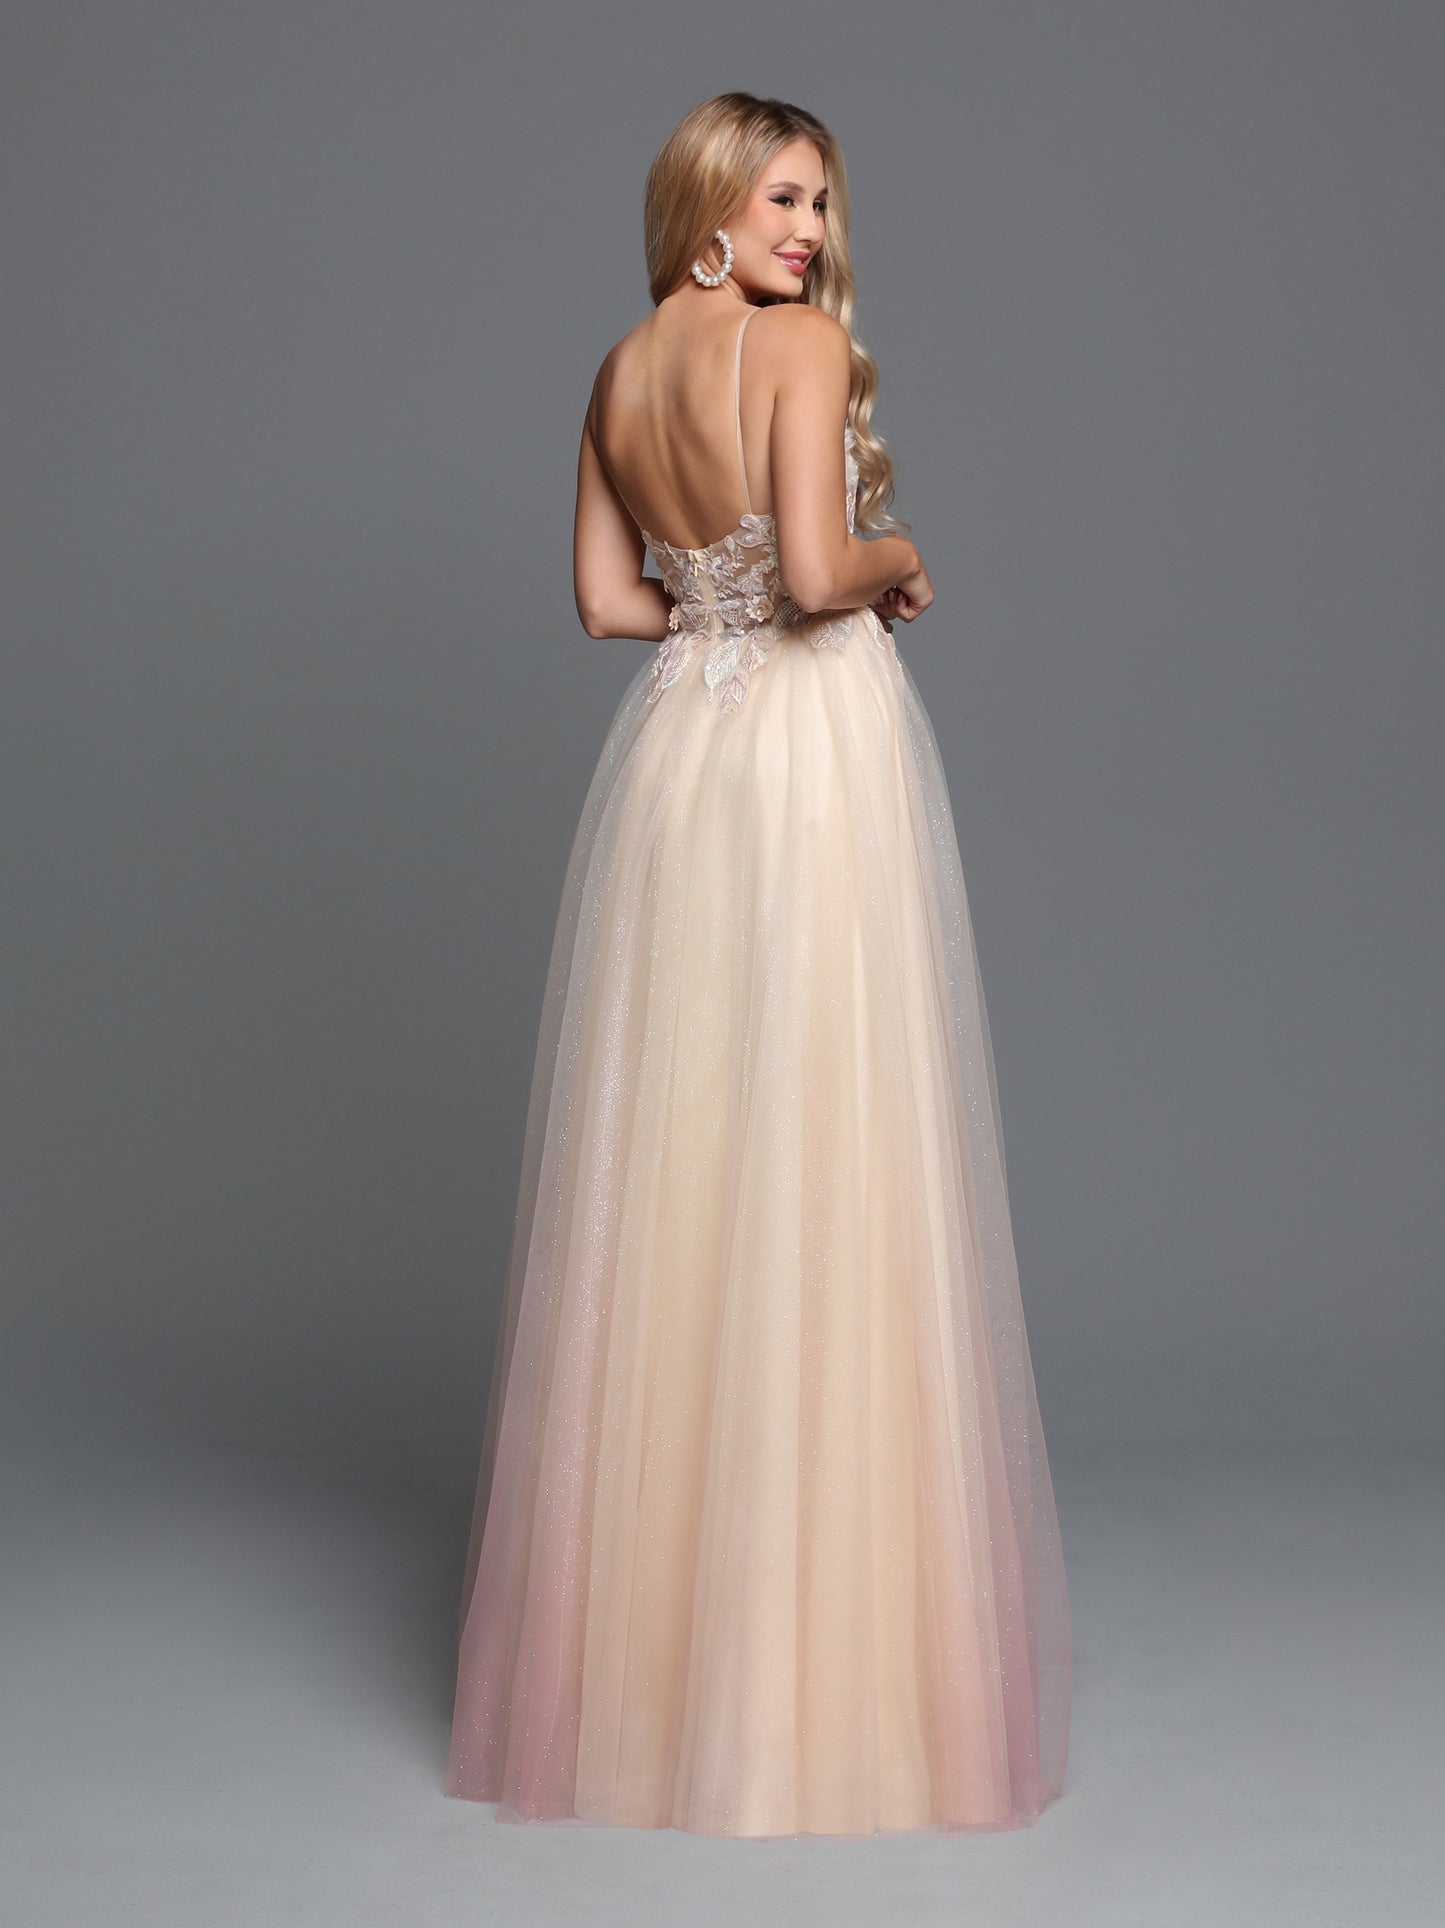 Sparkle Prom 72255 Long Shimmer A Line Prom Dress Sheer Lace V Neck Formal Gown  Sizes: 0-20  Colors: Champagne